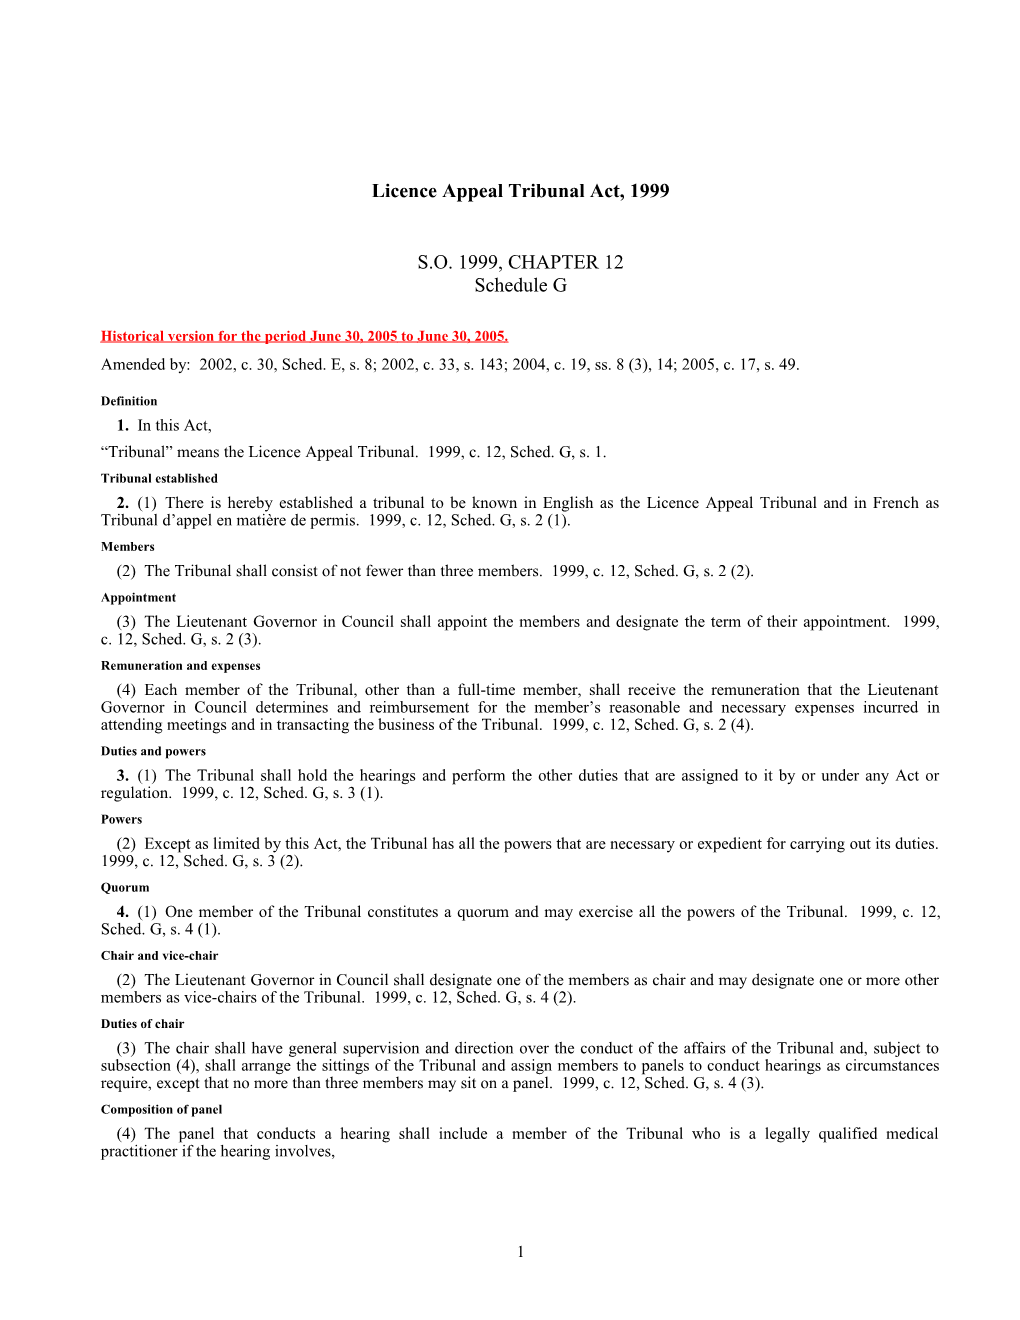 Licence Appeal Tribunal Act, 1999, S.O. 1999, C. 12, Sched. G